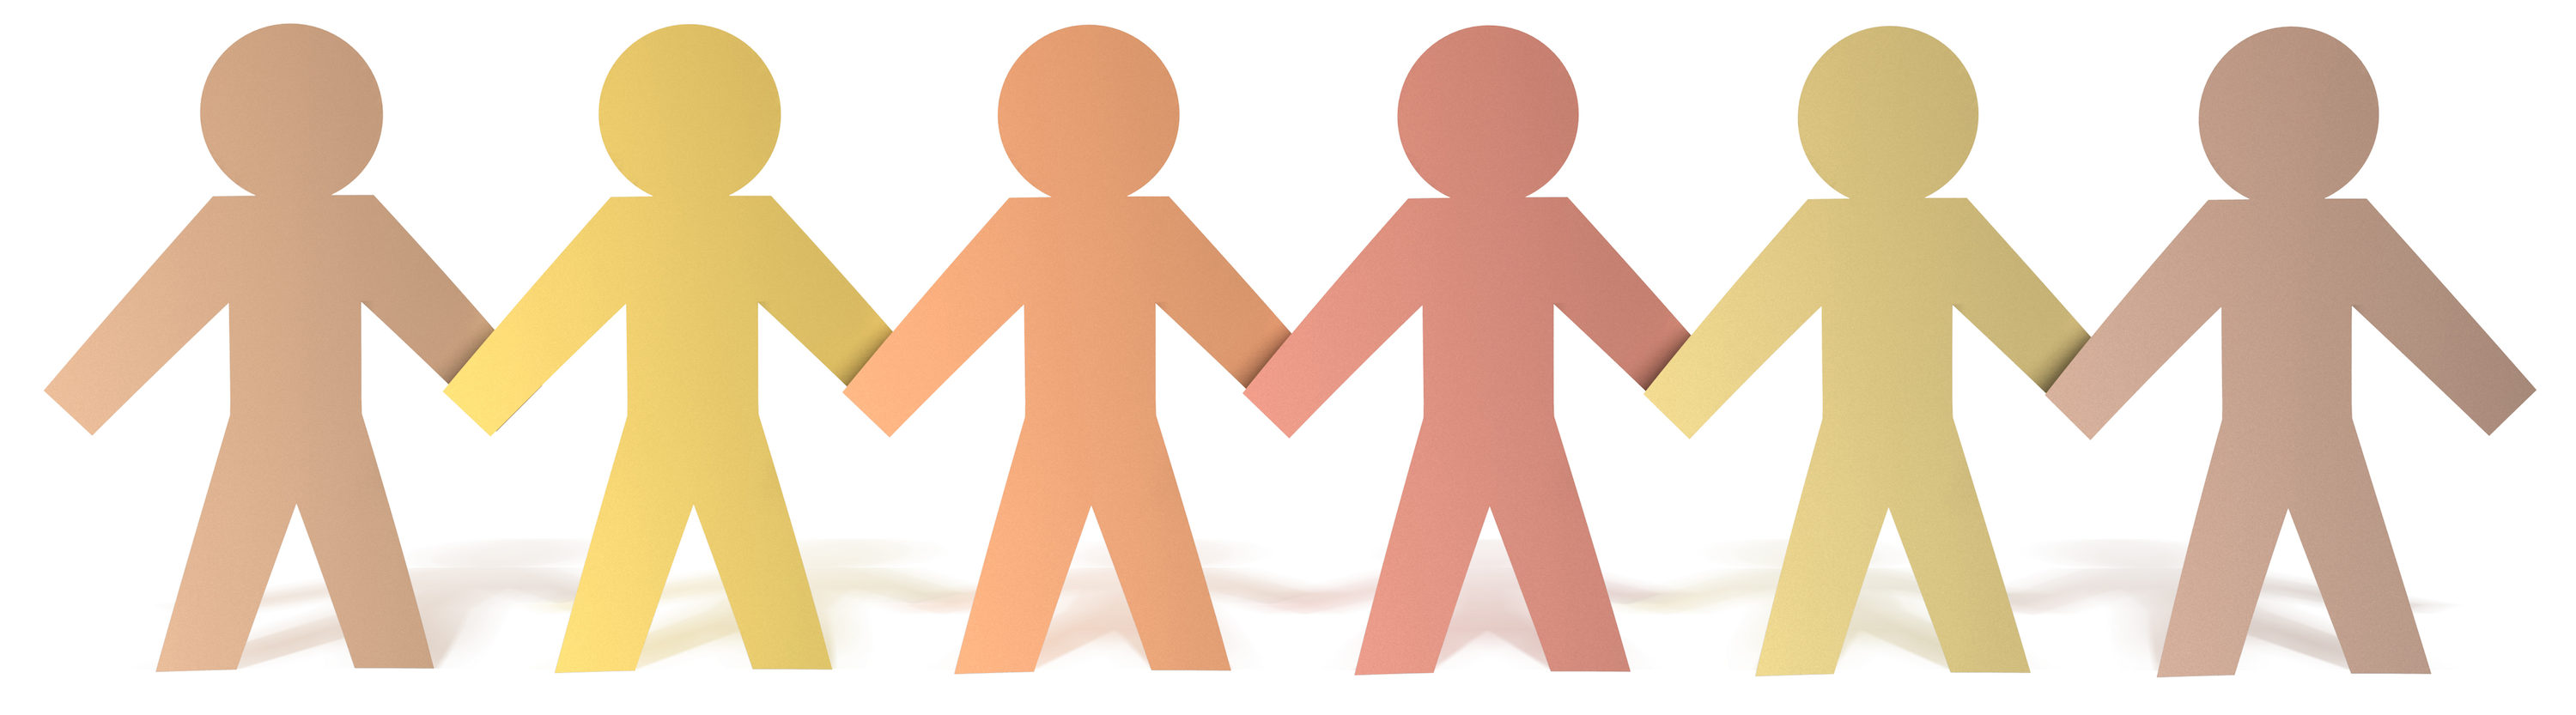 Free People Holding Hands, Download Free People Holding Hands png